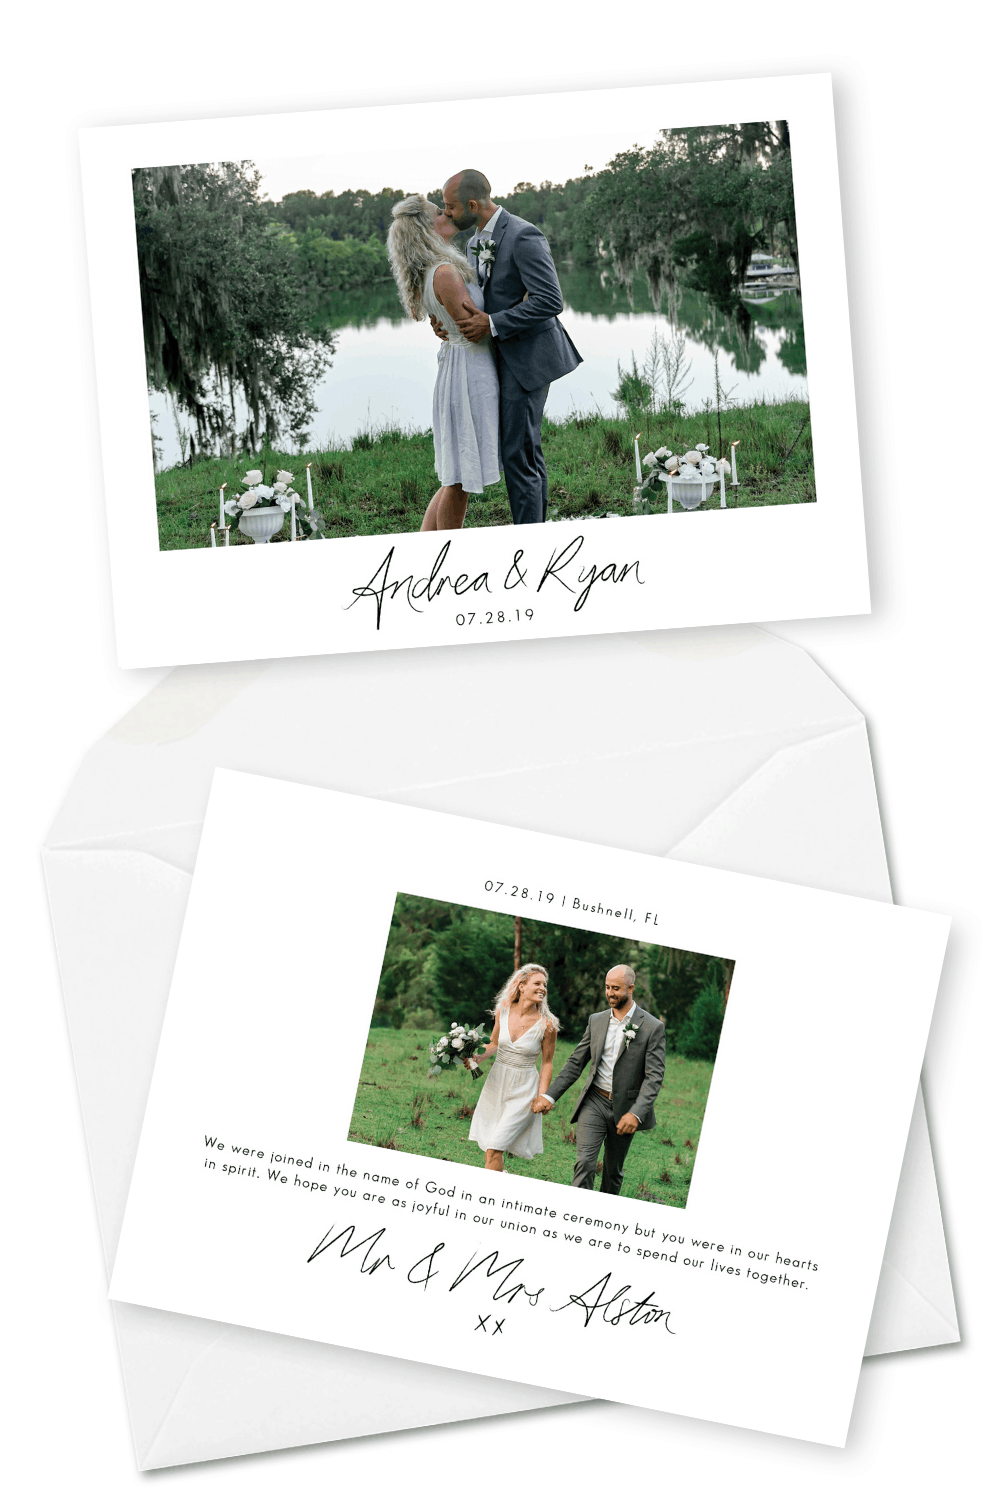 Elopement Announcements Photo Wedding Invitations For the Love of Stationery Moonman Productions